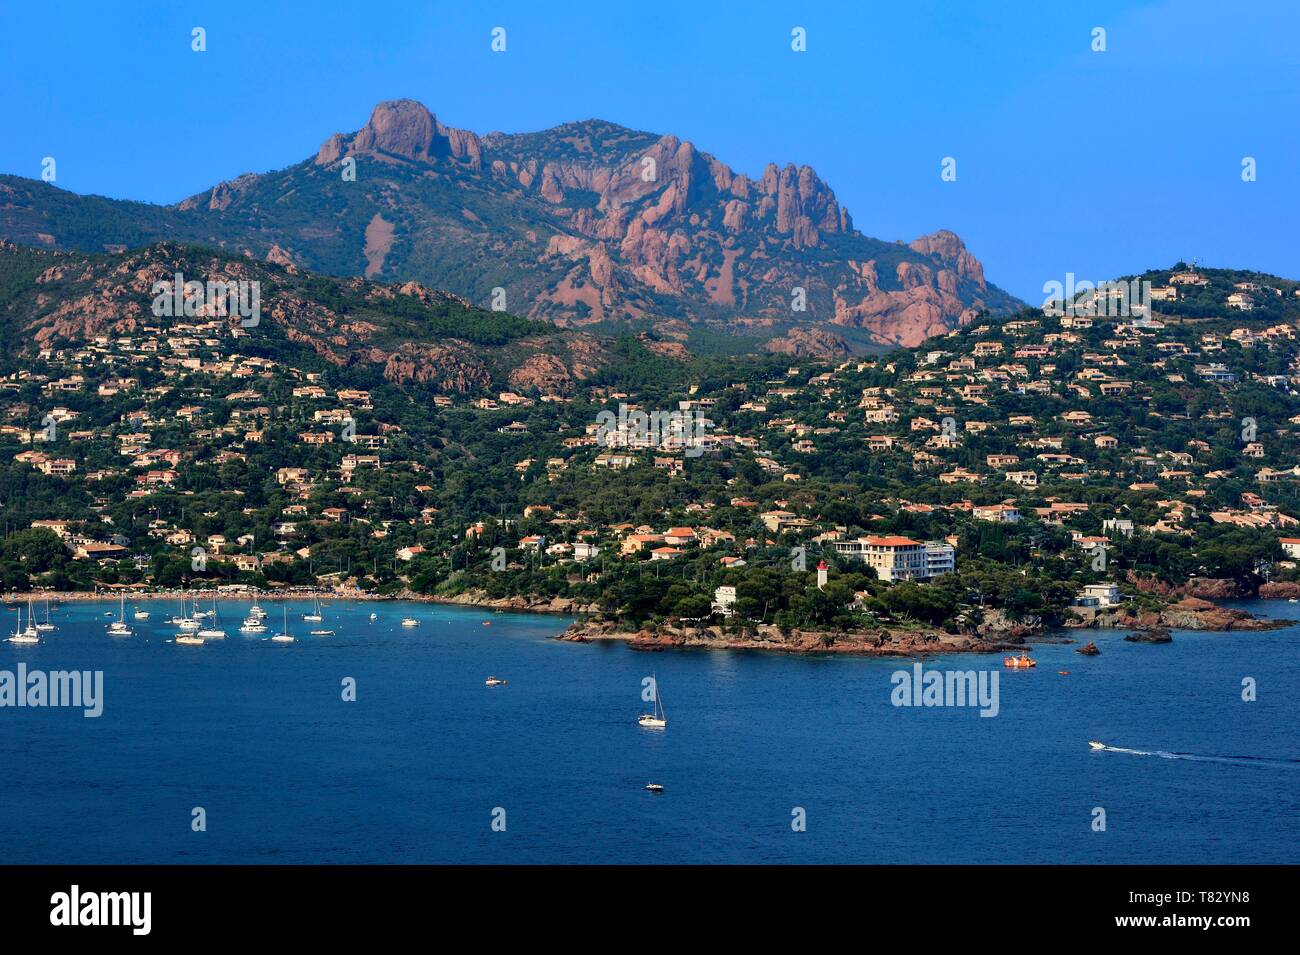 France, Var, Agay area next to Saint Raphael, Massif de l'Esterel (Esterel  Massif), the harbor and village of Agay, the peak of Cap Roux in the  background Stock Photo - Alamy